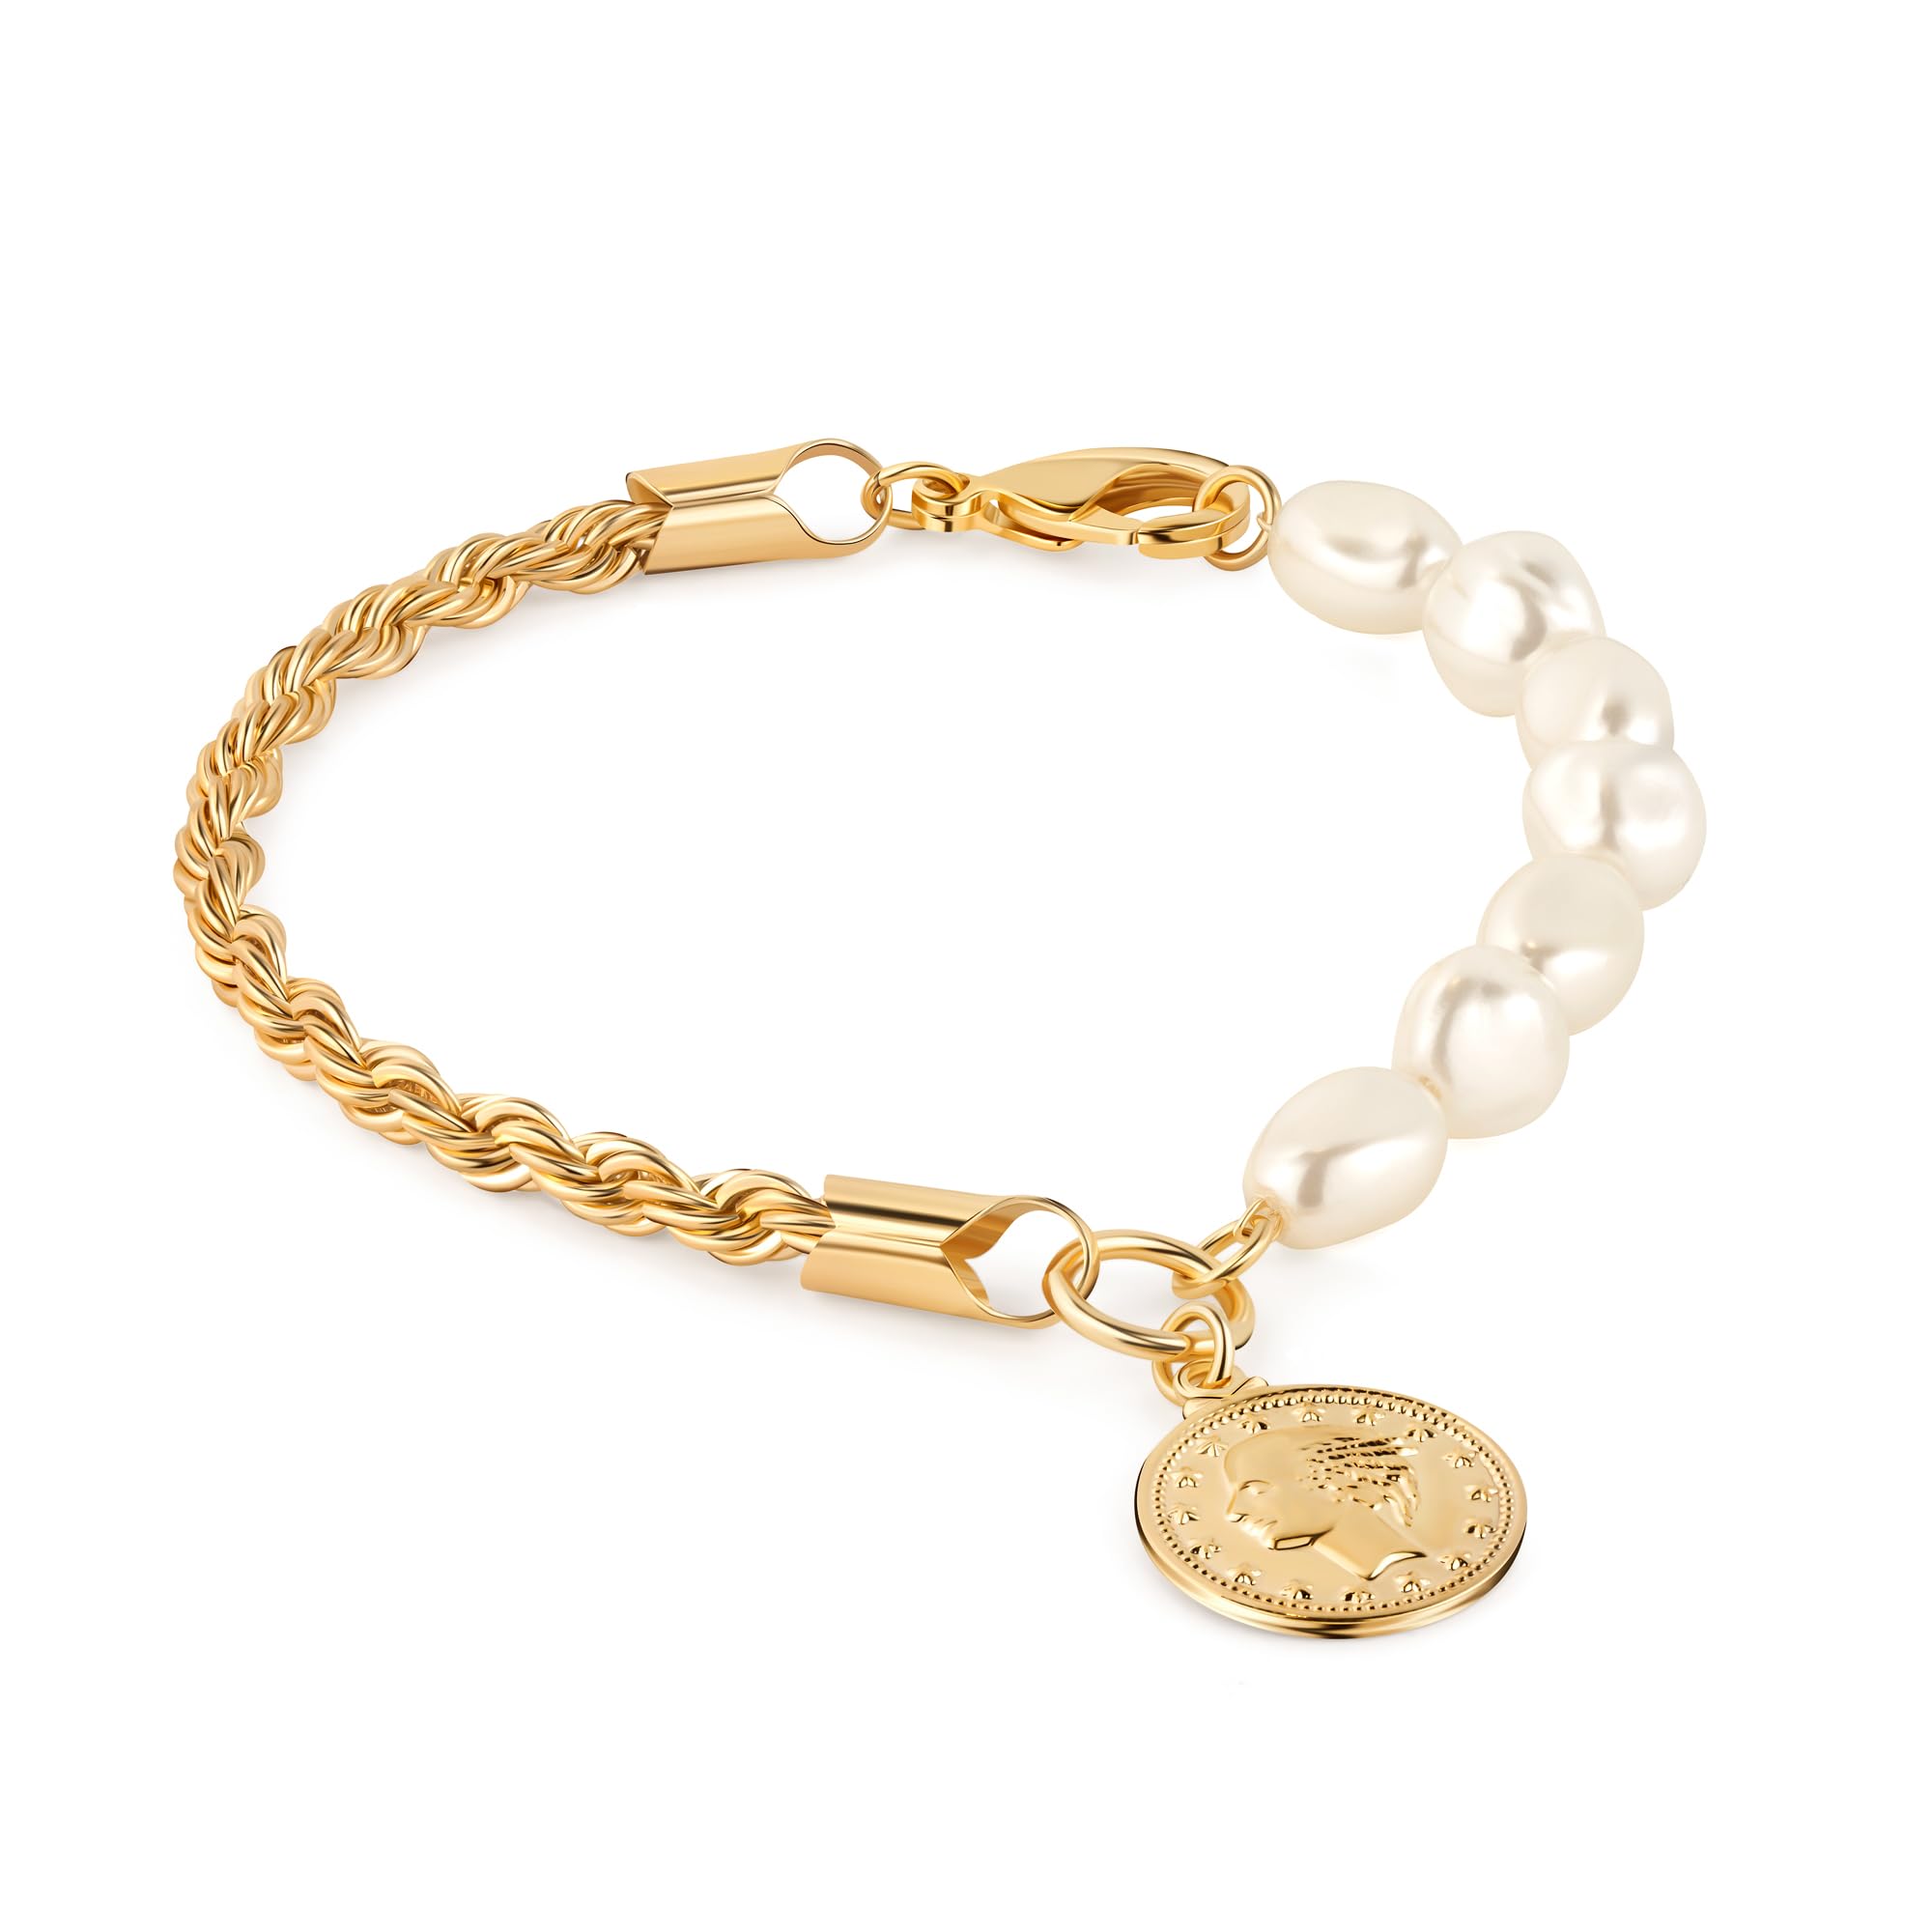 18K Gold Plated Rope & Pearl Bracelet with Coin Charm - 7.5 Inches